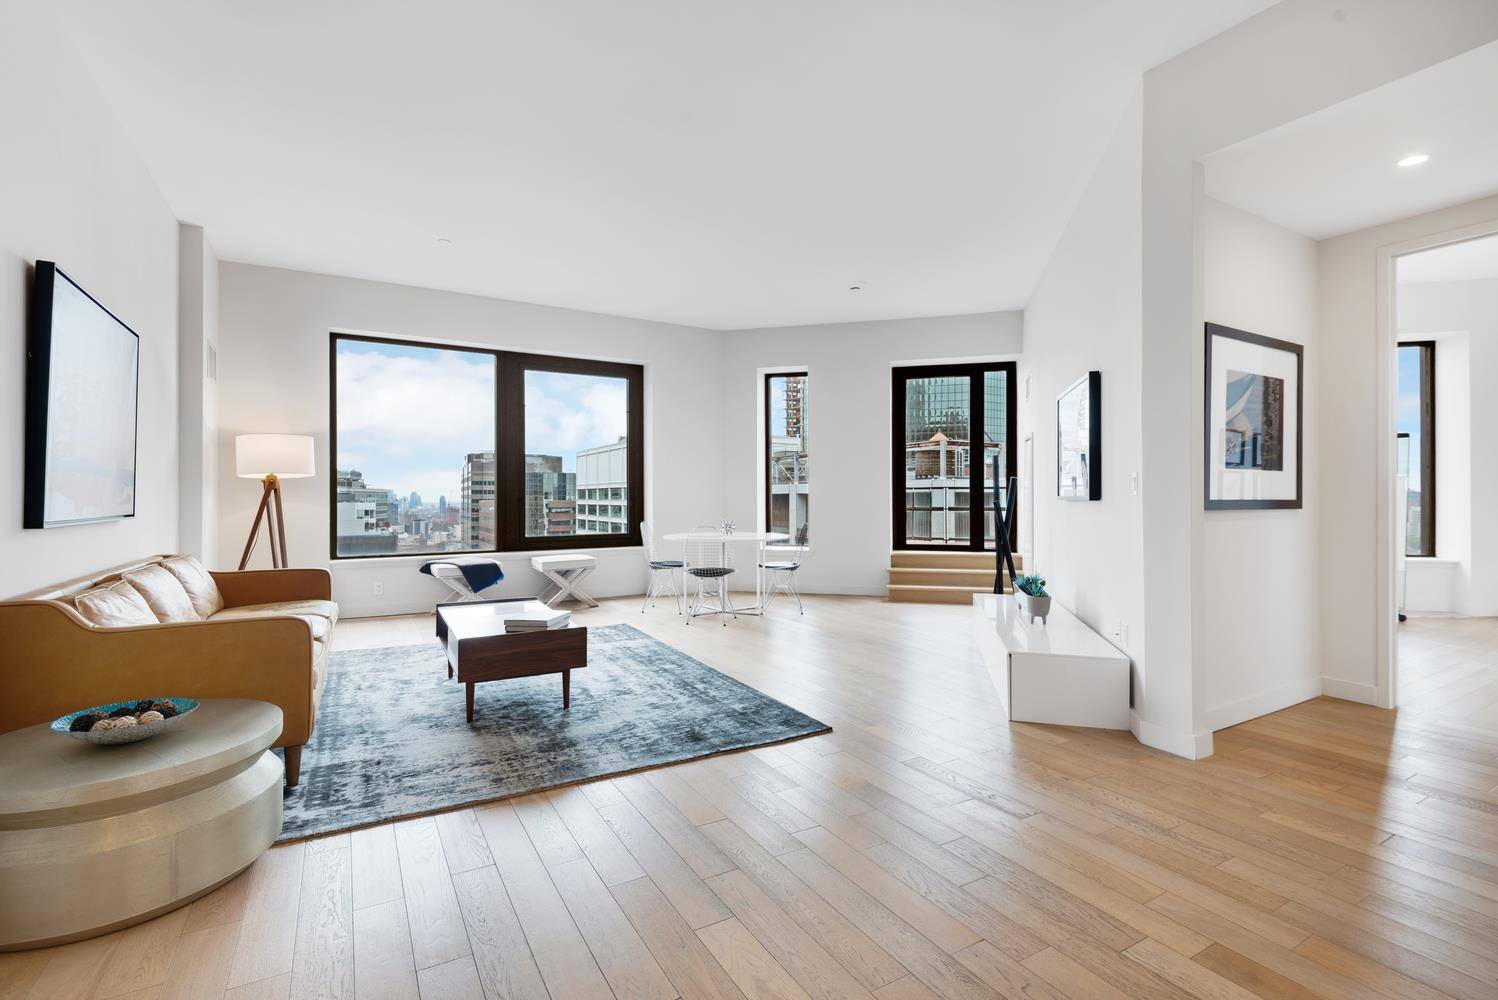 This spectacular 3 bedroom 3 bathroom corner unit with alcove home office and 118 SQ FT private terrace offers walls of windows and unobstructed Northeastern views high above the New ...